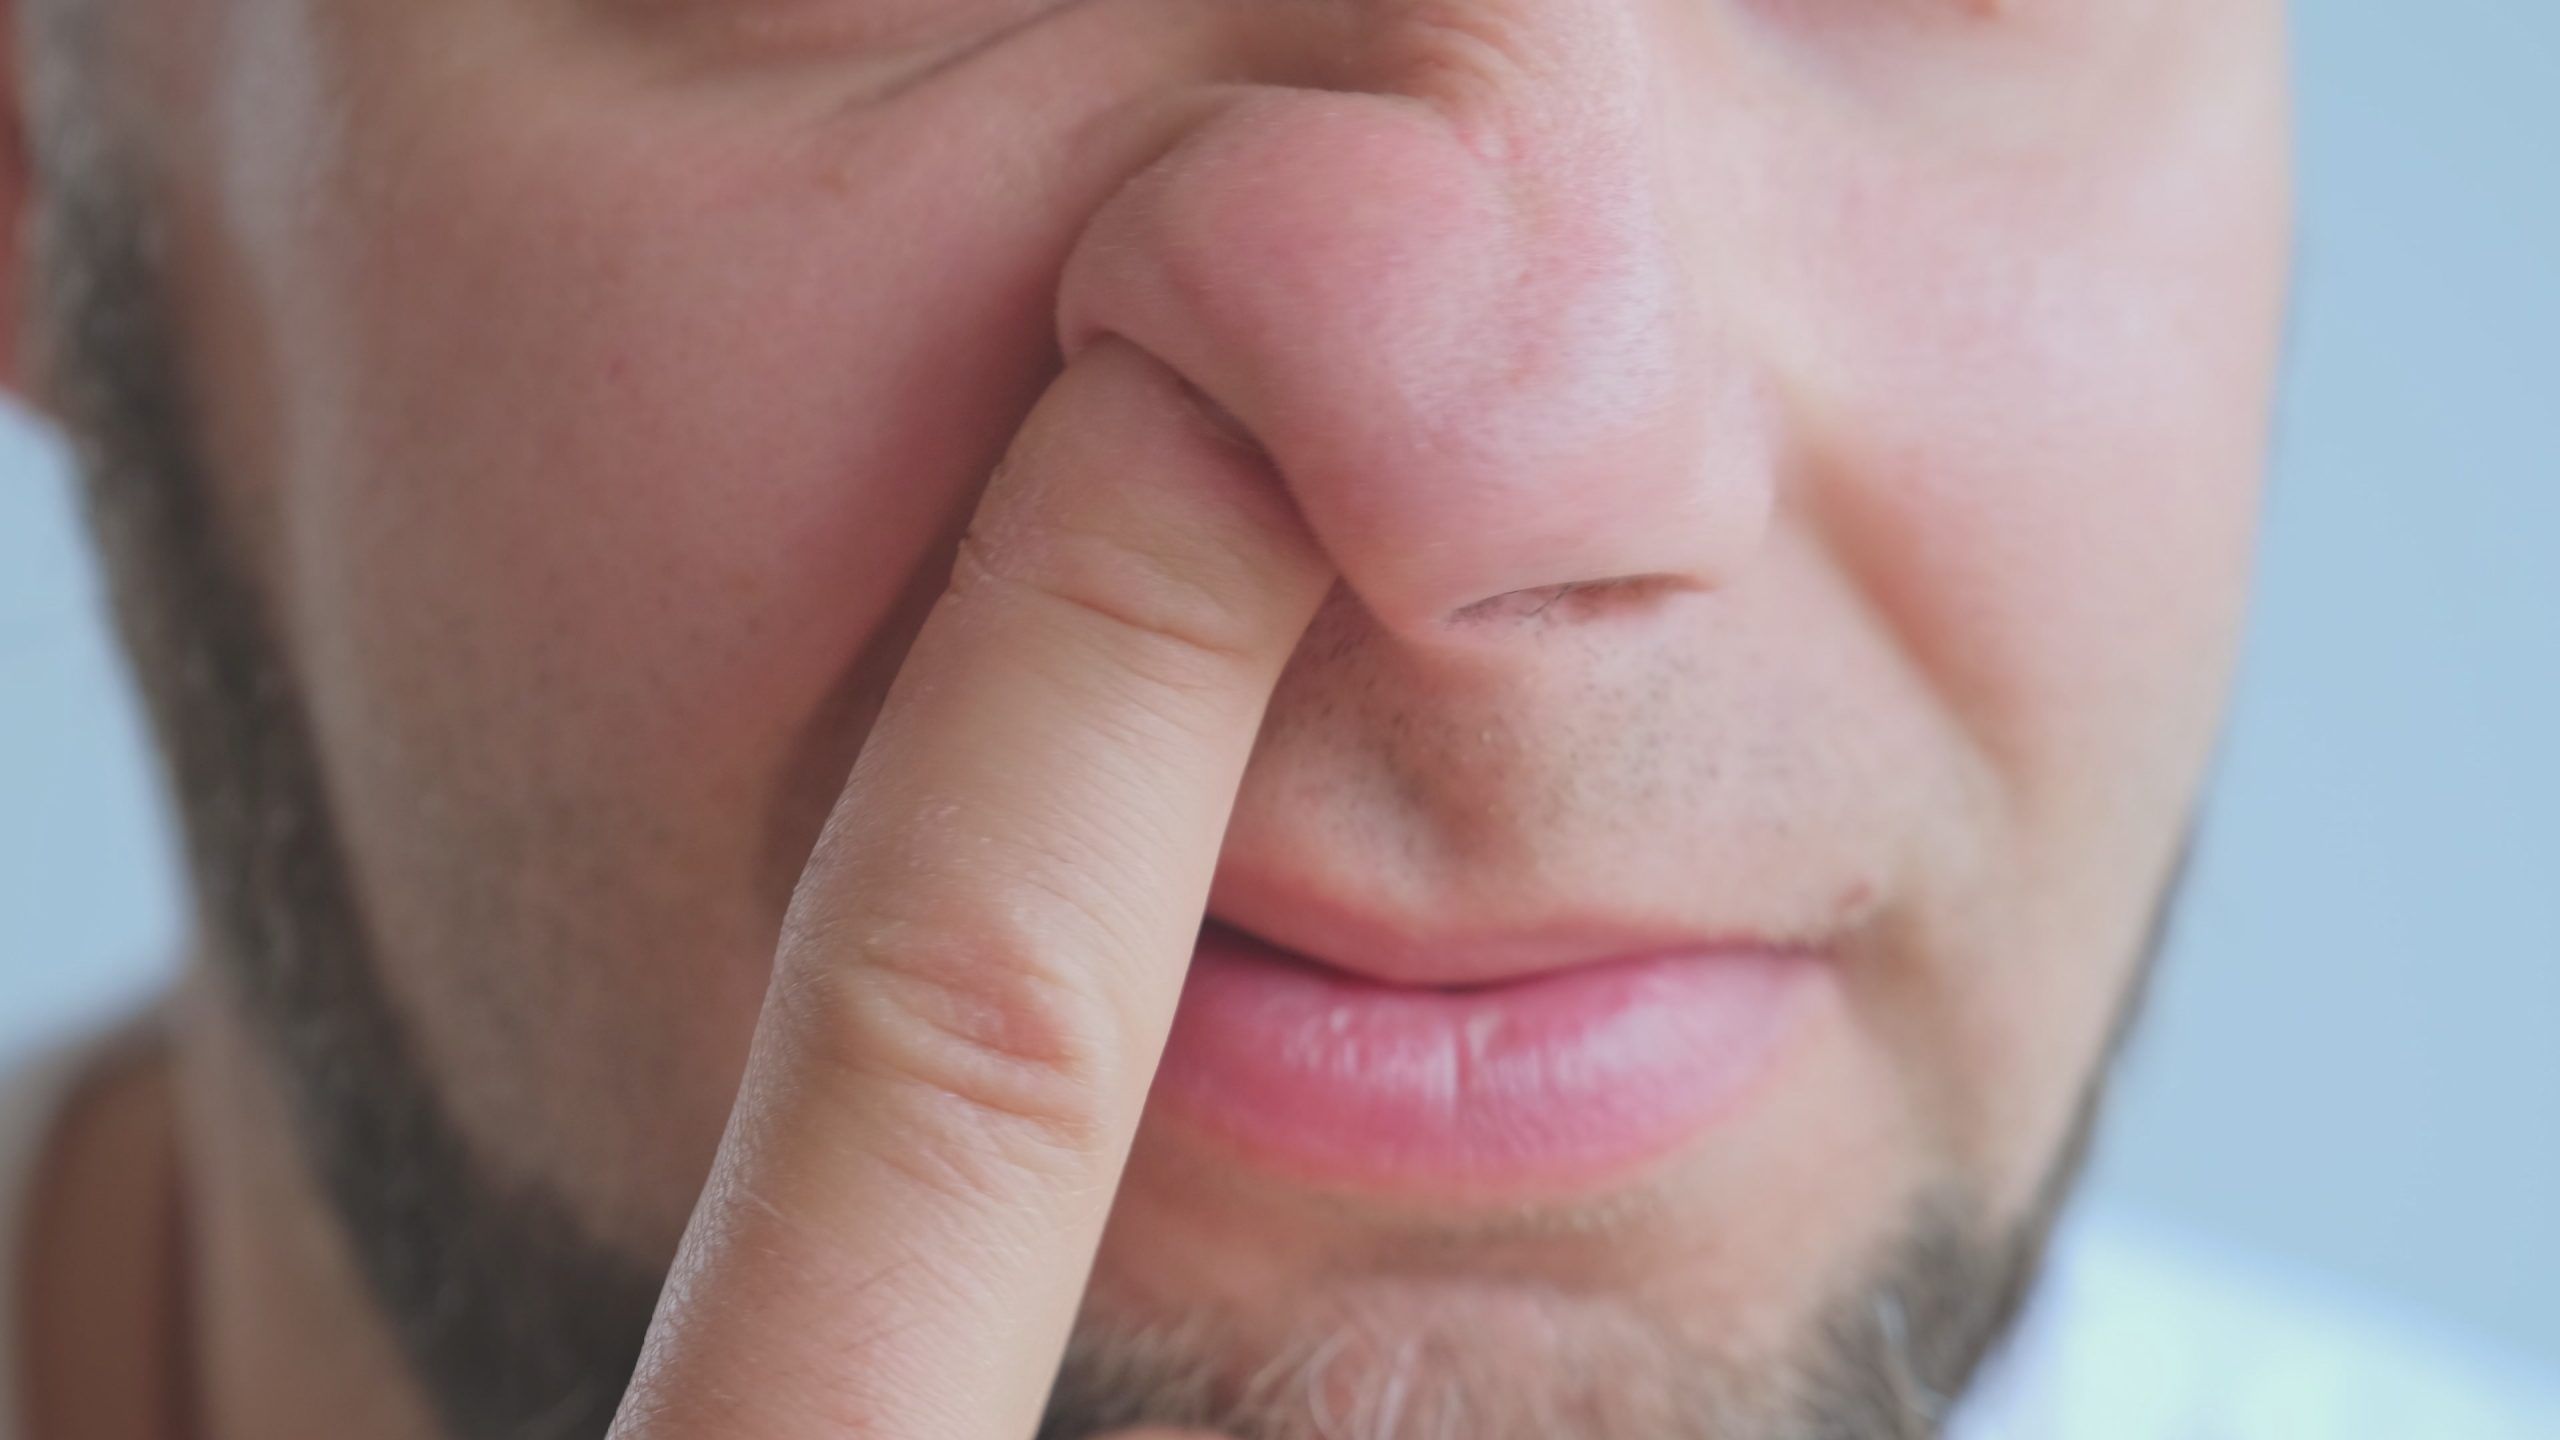 Nose picking by those 65-plus can increase bacteria into brain